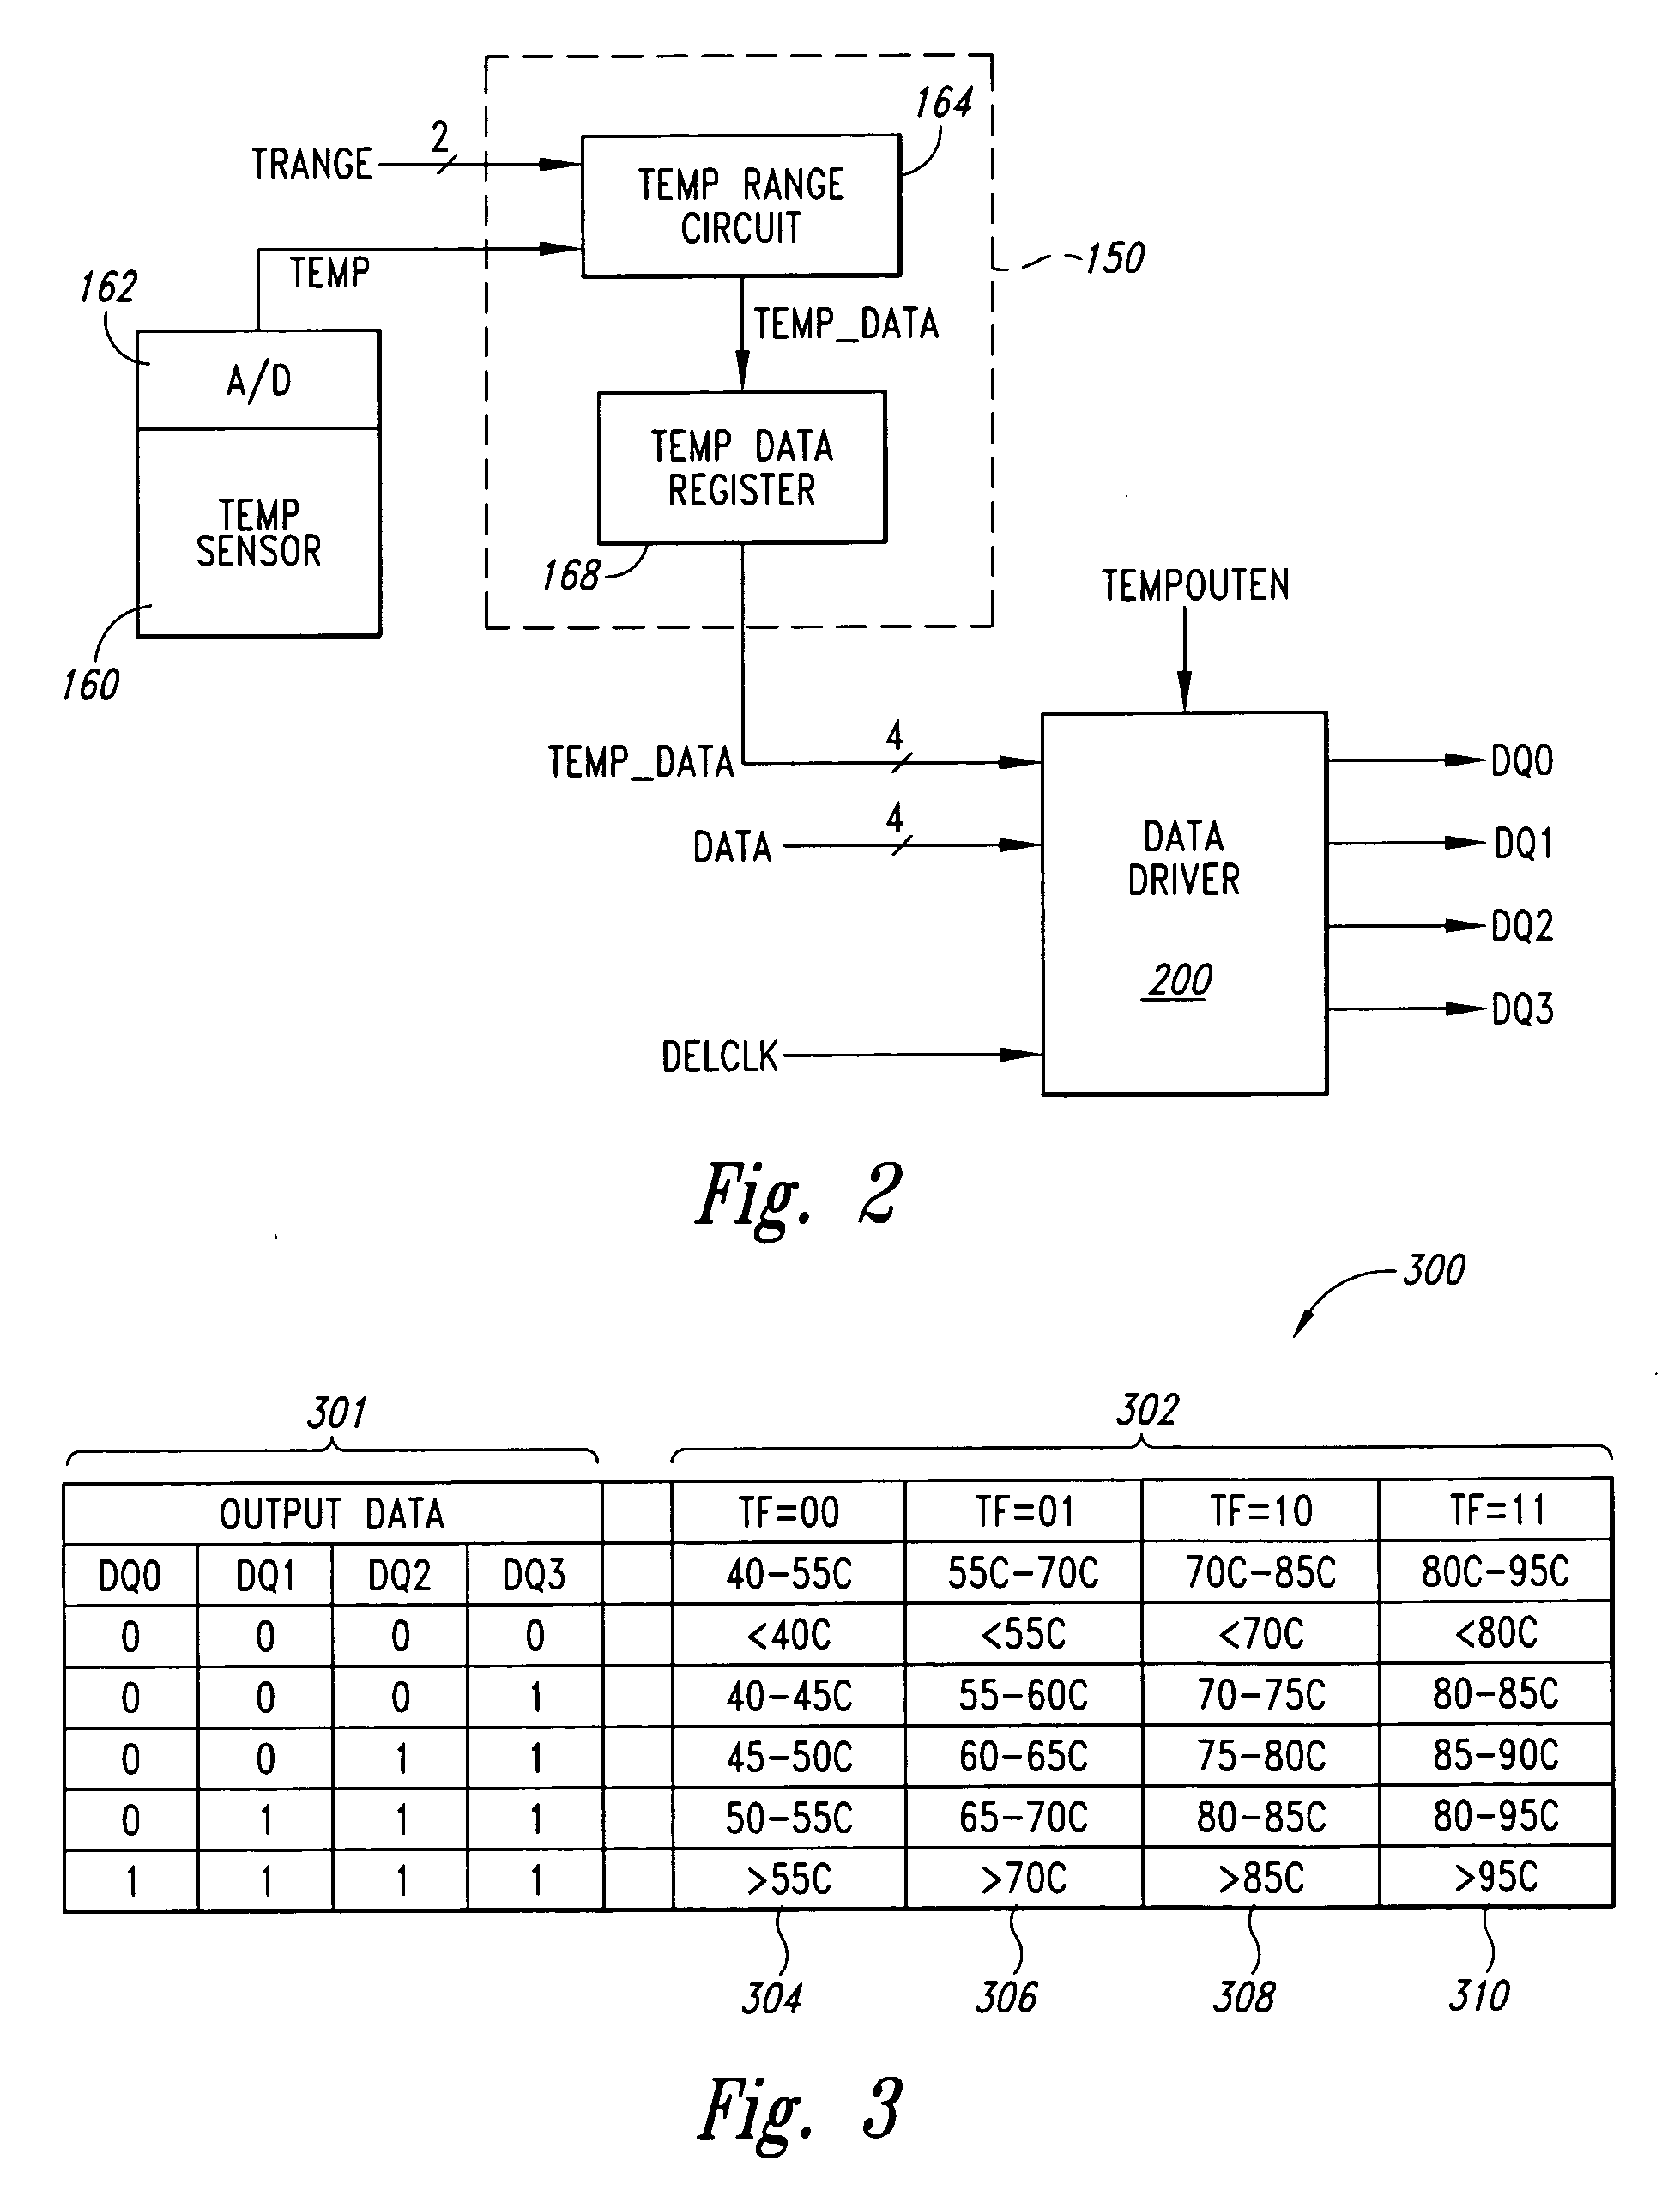 System and method for providing temperature data from a memory device having a temperature sensor